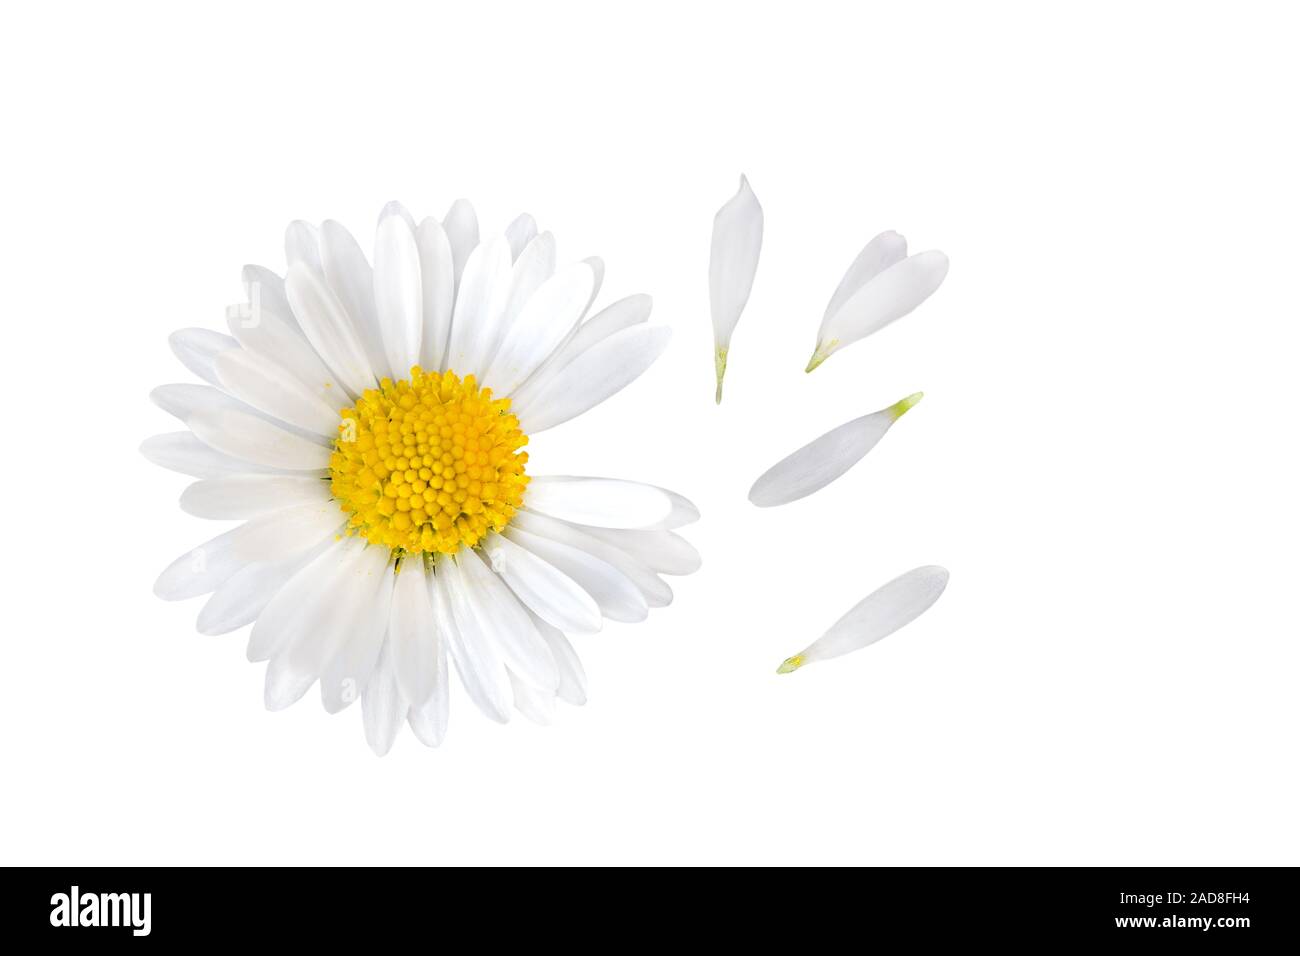 Daisy (Bellis perennis) with separate petals Stock Photo